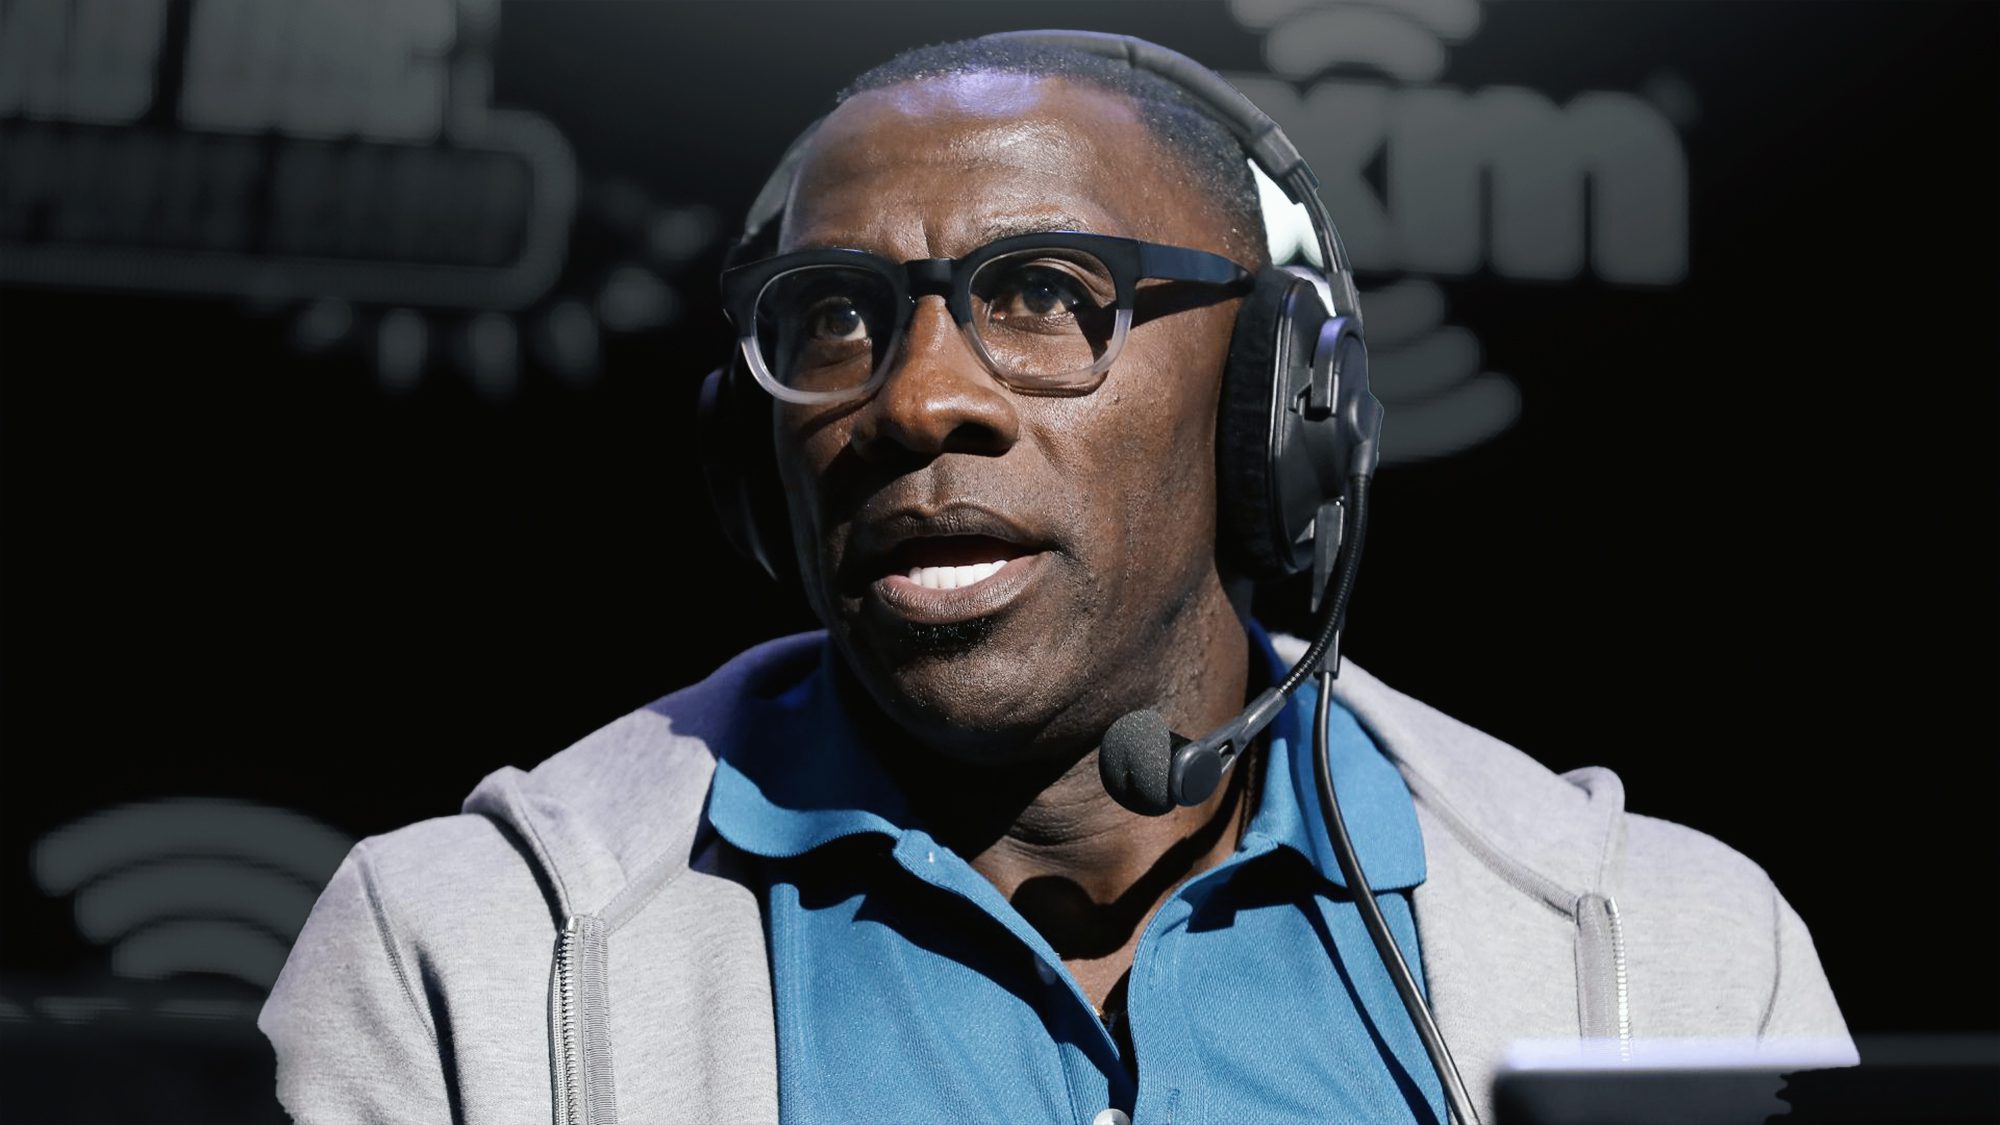 Shannon Sharpe Apologizes For Altercation With Grizzlies